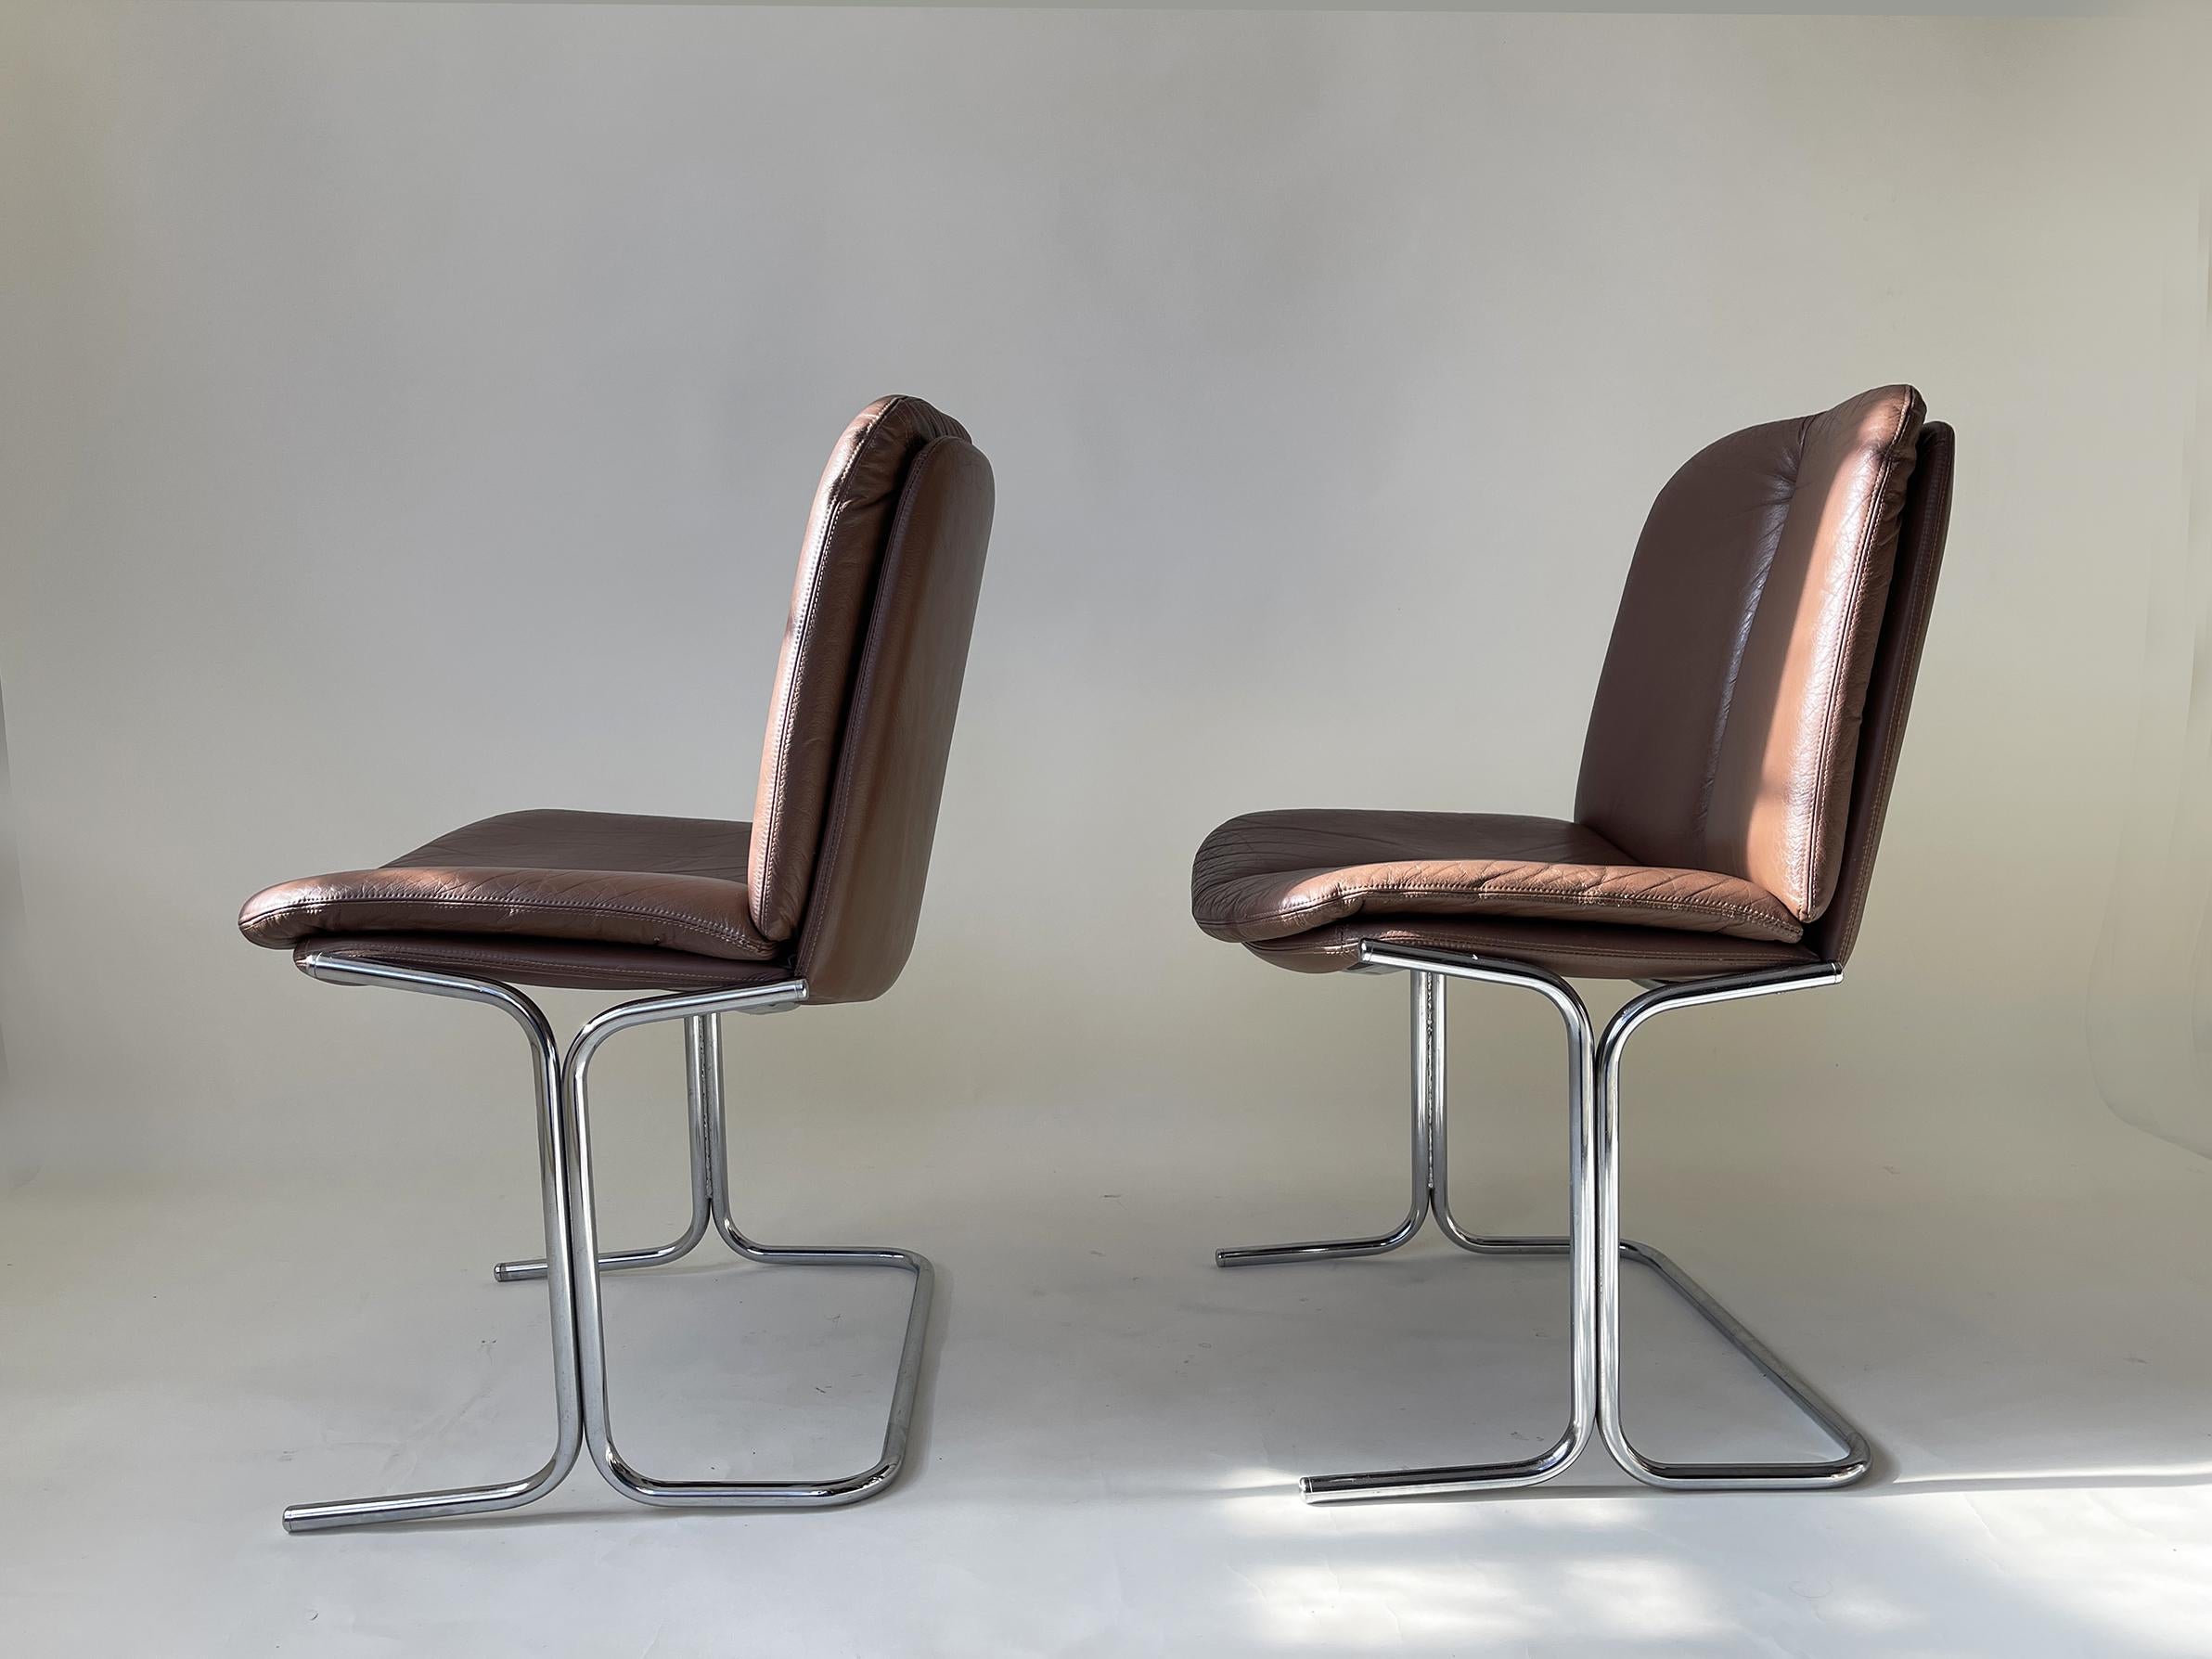 SET OF FOUR DINING CHAIRS IN AN AMAZING CHOCOLATE BROWN LEATHER BY ENGLISH FURNITURE MANUFACTURERS PIEFF. I ABSOLUTELY LOVE THESE CHAIRS, PERFECT AS DINING CHAIRS AND INCREDIBLY COMFORTABLE SEATS. 

* TIM BATES FOR PIEFF
* CIRCA 1970S
* ORIGINALLY